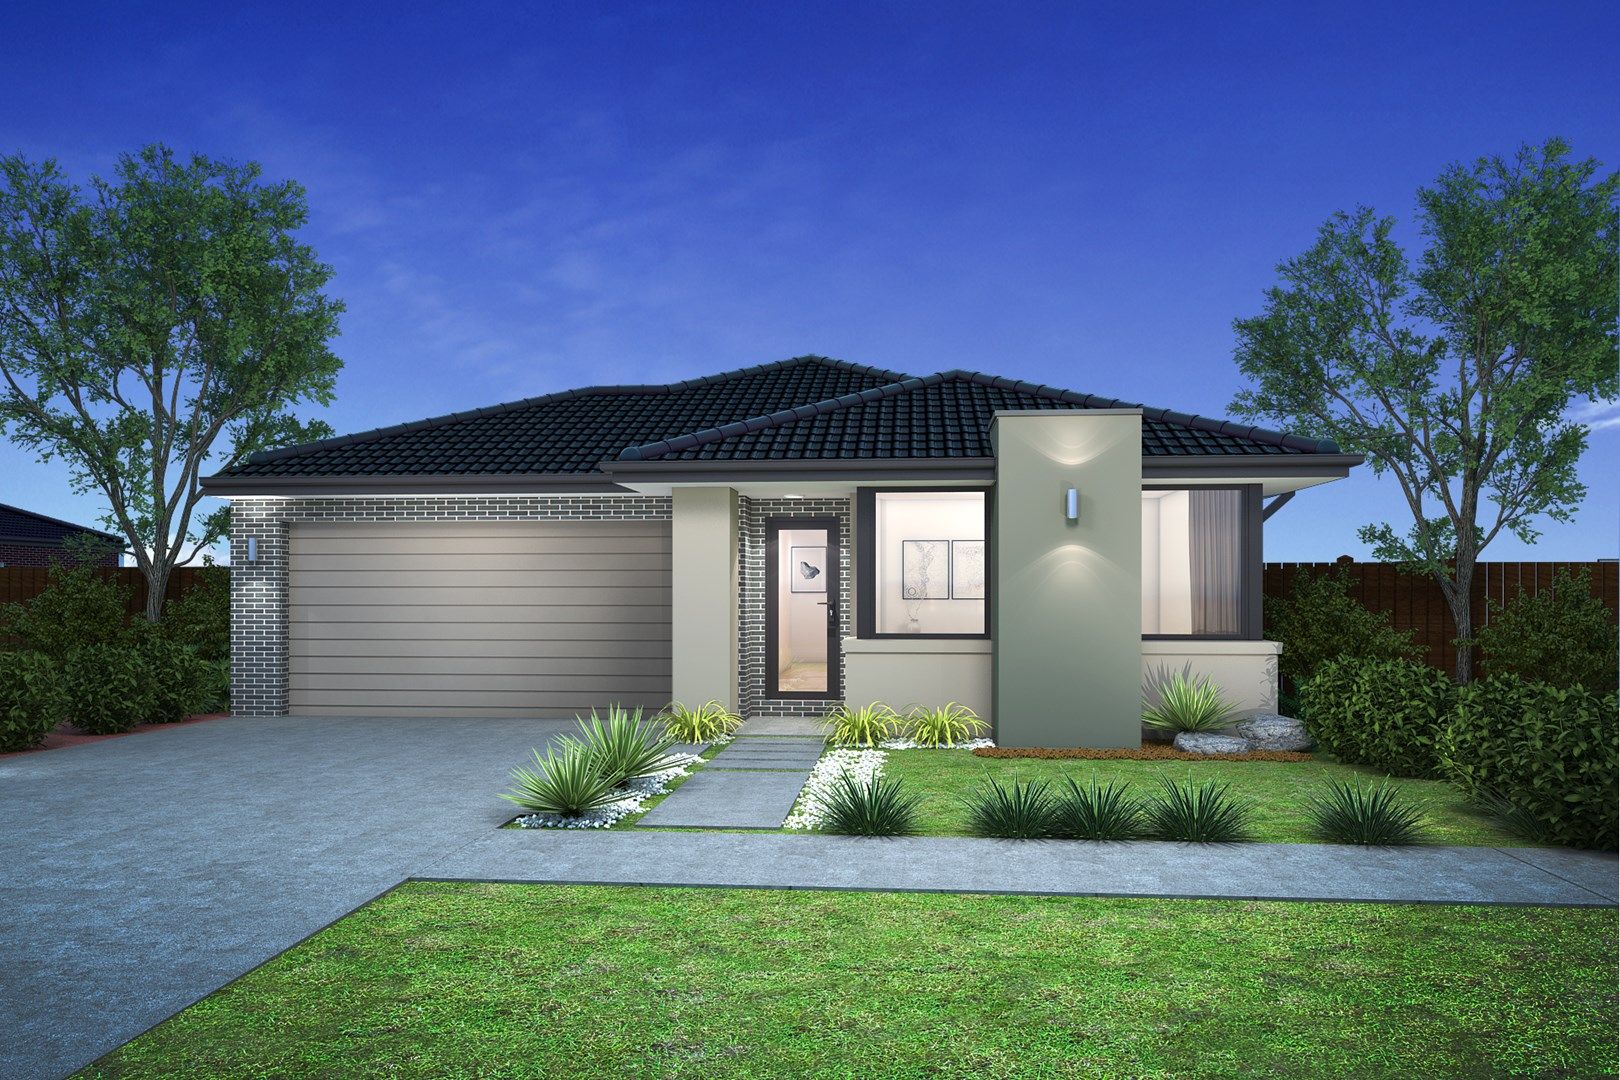 4 bedrooms New House & Land in 9 Gilroy Crescent CHARLEMONT VIC, 3217